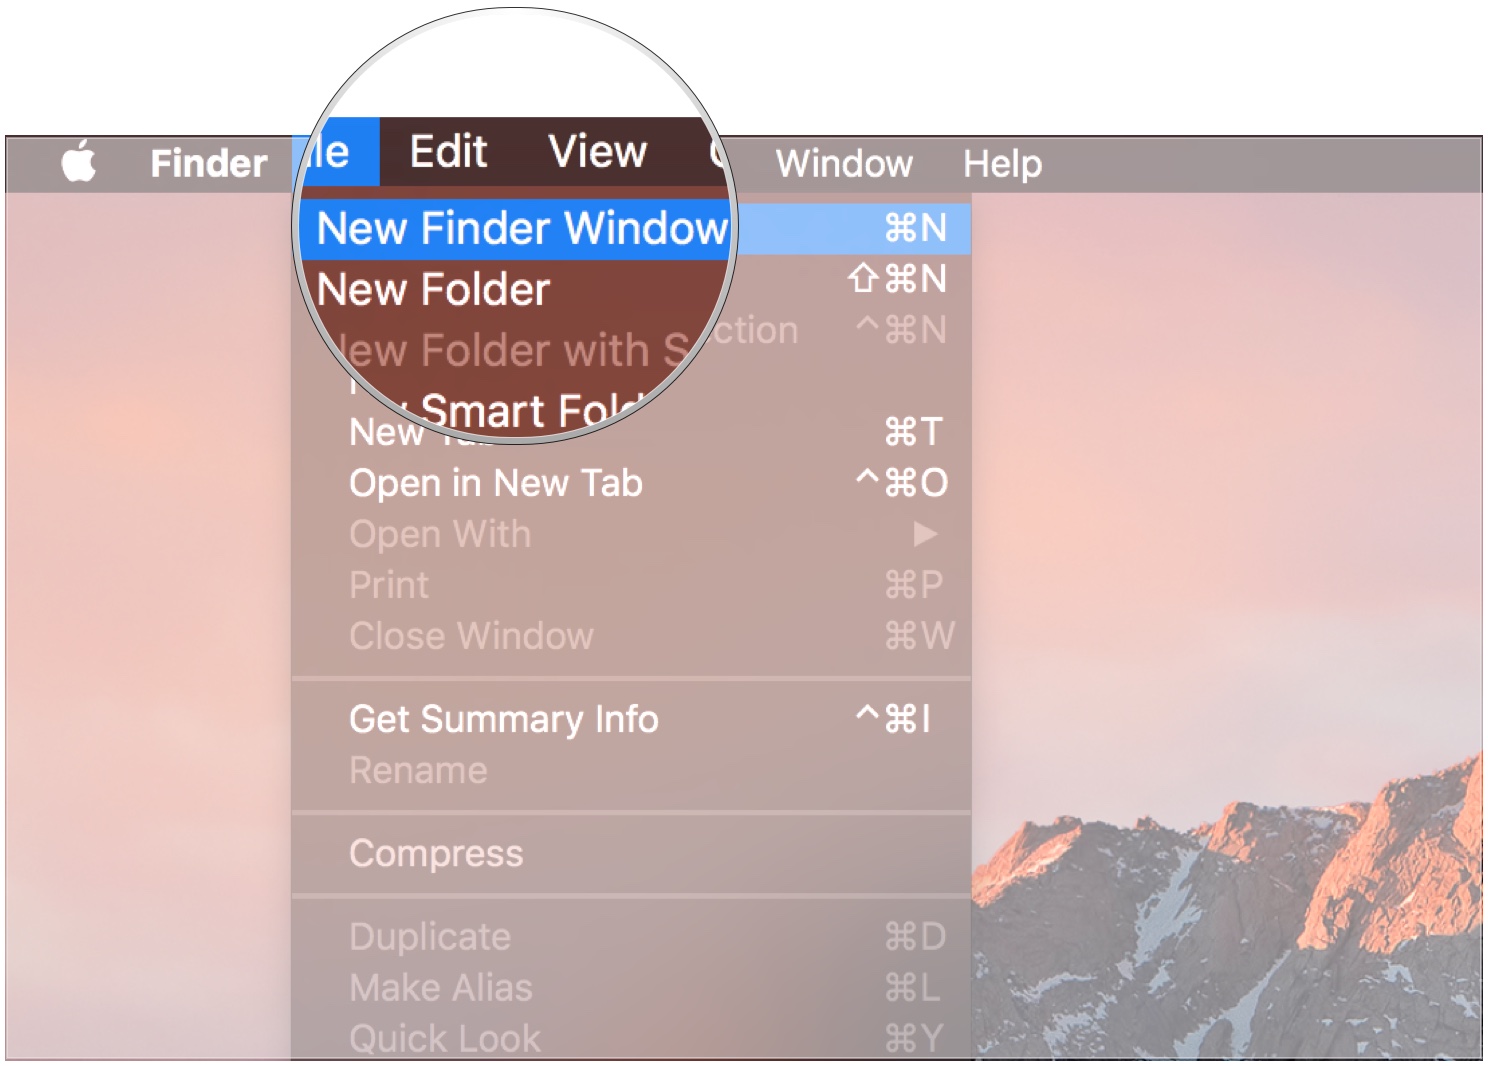 To open a Finder window, click on your desktop then click on File, and New Finder Window.